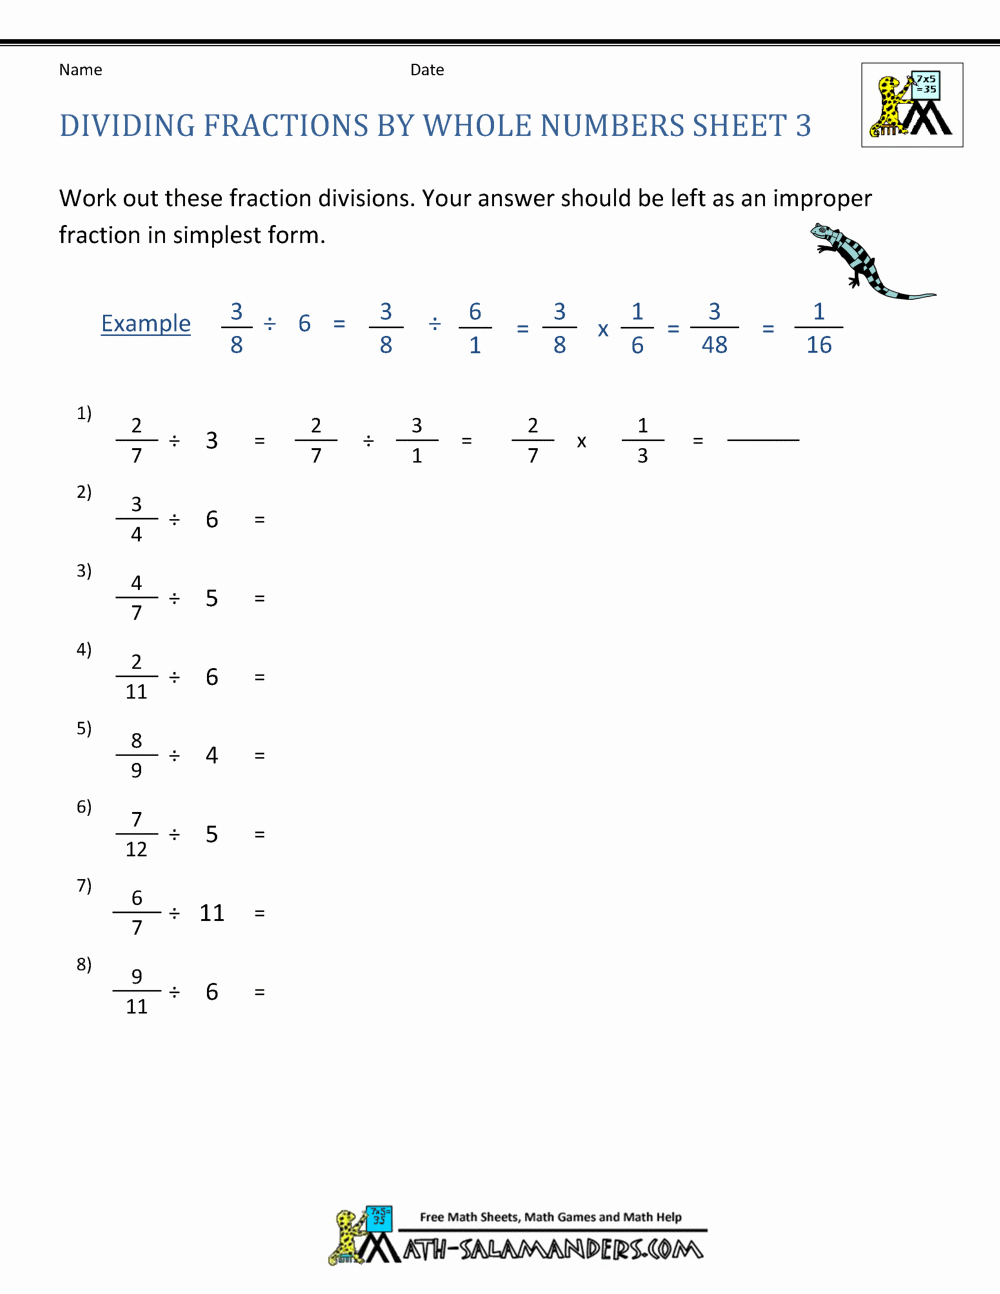 Dividing Fractions Worksheet Pdf New Dividing Fractions by whole Numbers